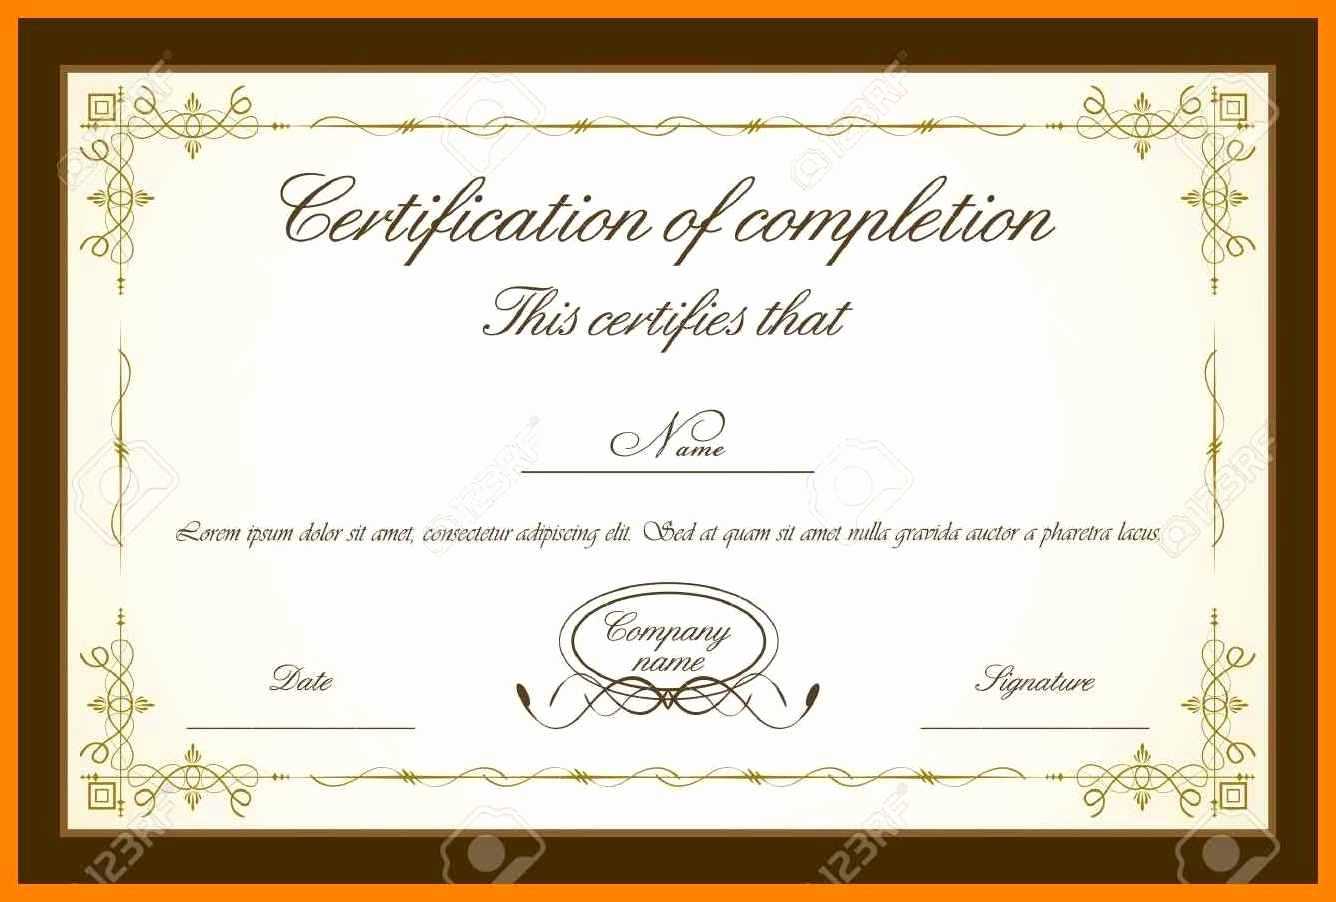 Awesome Pictures Of Certificate Templates Free Download Ppt Throughout Powerpoint Certificate Templates Free Download